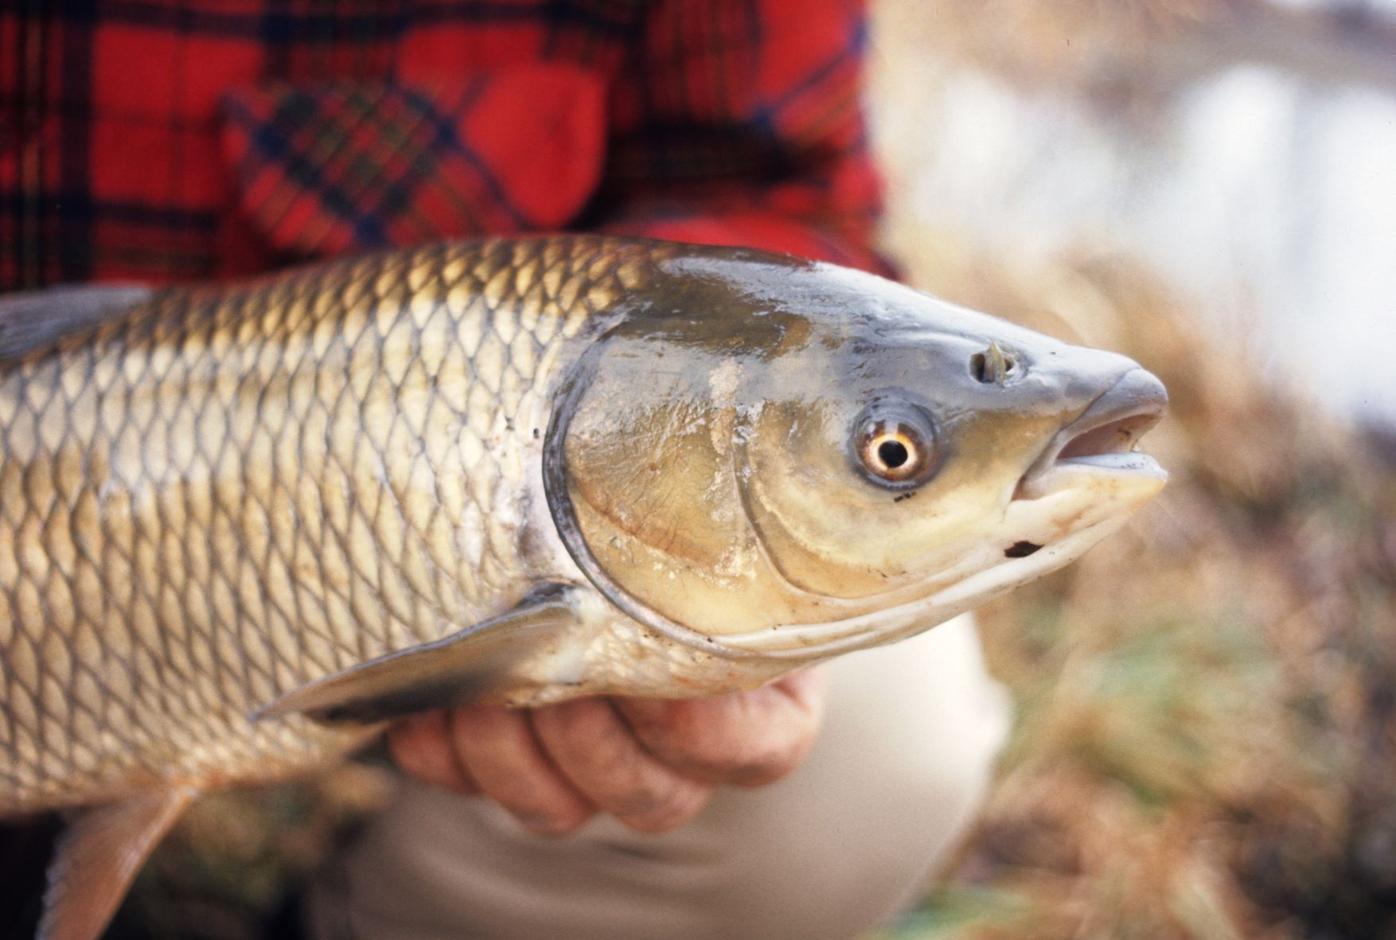 What is Asian Carp and how is it used?